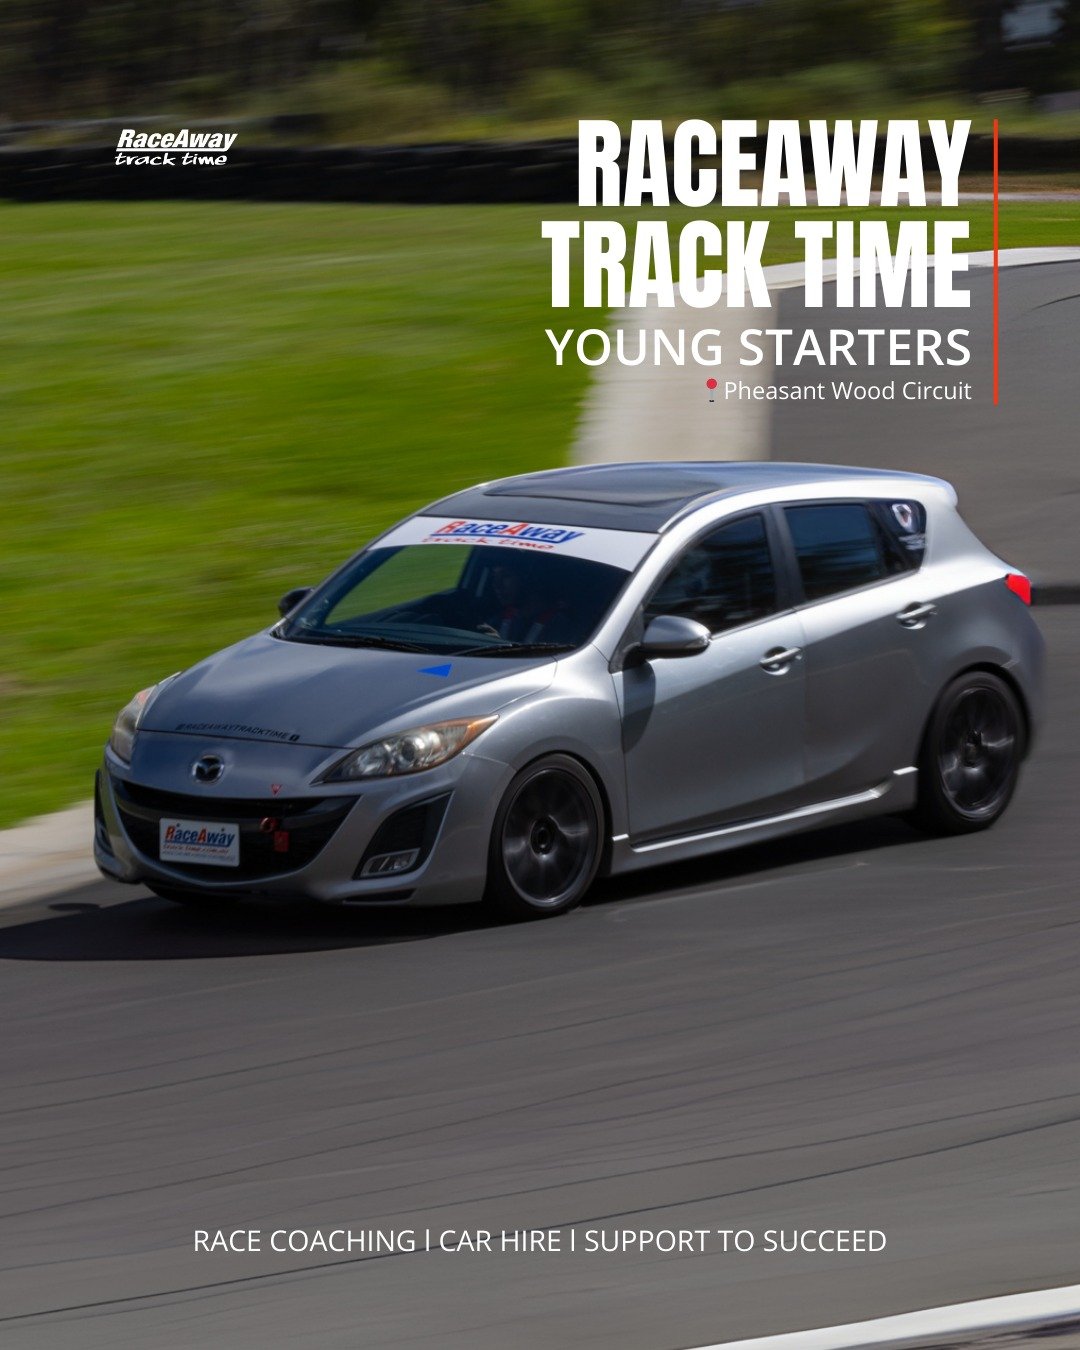 We had such a huge response from our young drivers post that we've created a special package JUST for you! 

Get your teen on the track with RaceAway's Young Starters! A day of one-on-one professional race coaching tailored to your young driver with 